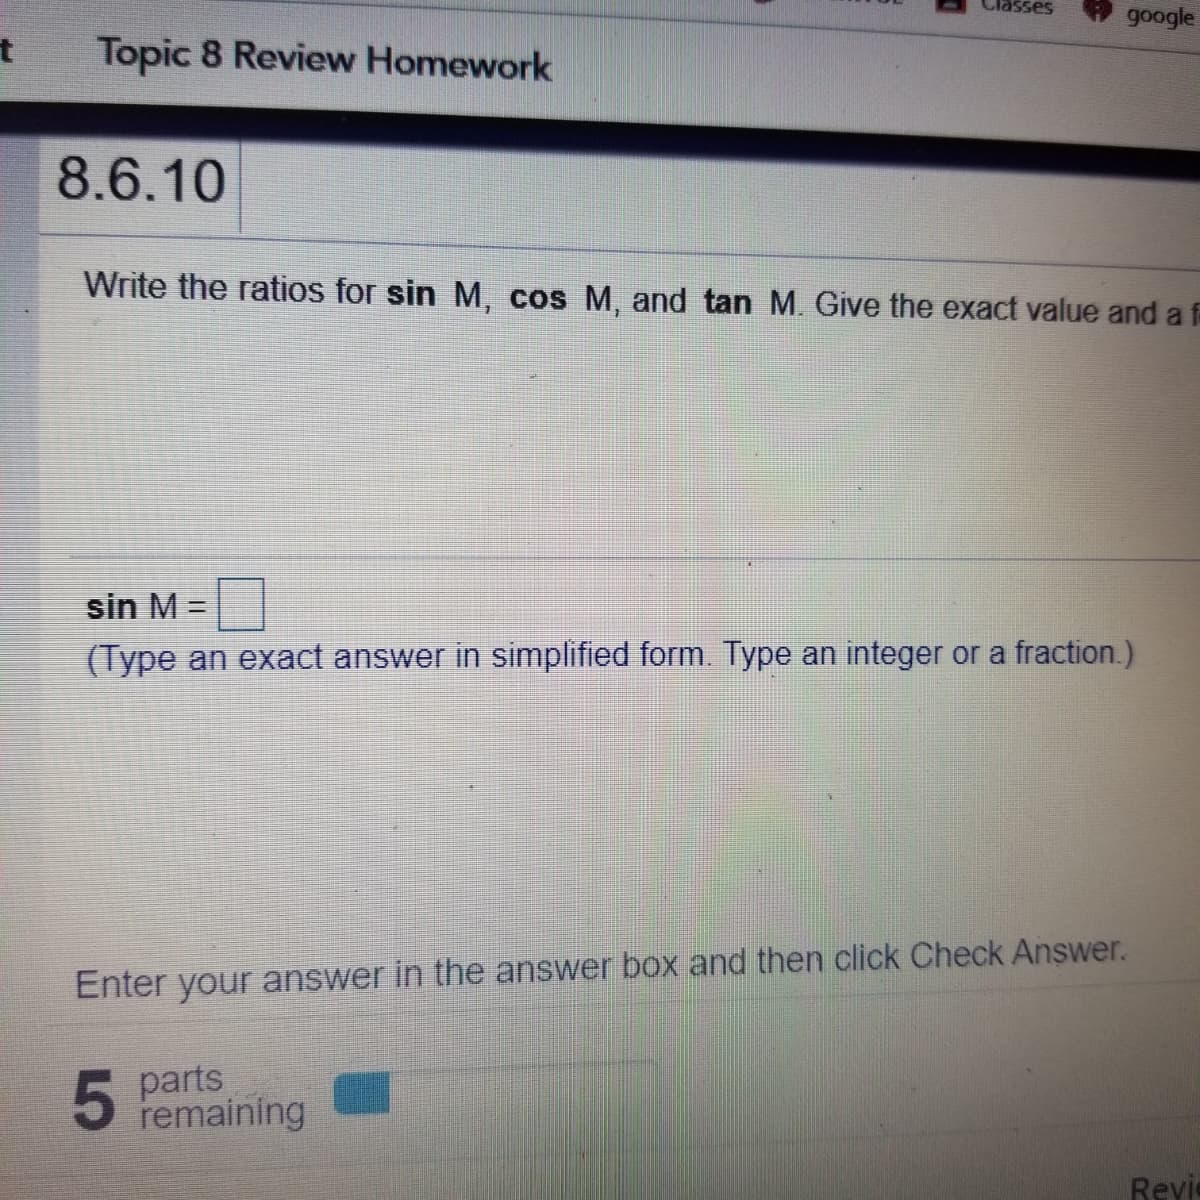 google
Topic 8 Review Homework
8.6.10
Write the ratios for sin M, cos M, and tan M. Give the exact value and a f
sin M =
(Type an exact answer in simplified form. Type an integer or a fraction.)
Enter your answer in the answer box and then click Check Answer.
5
5 parts
remaining
Revie
